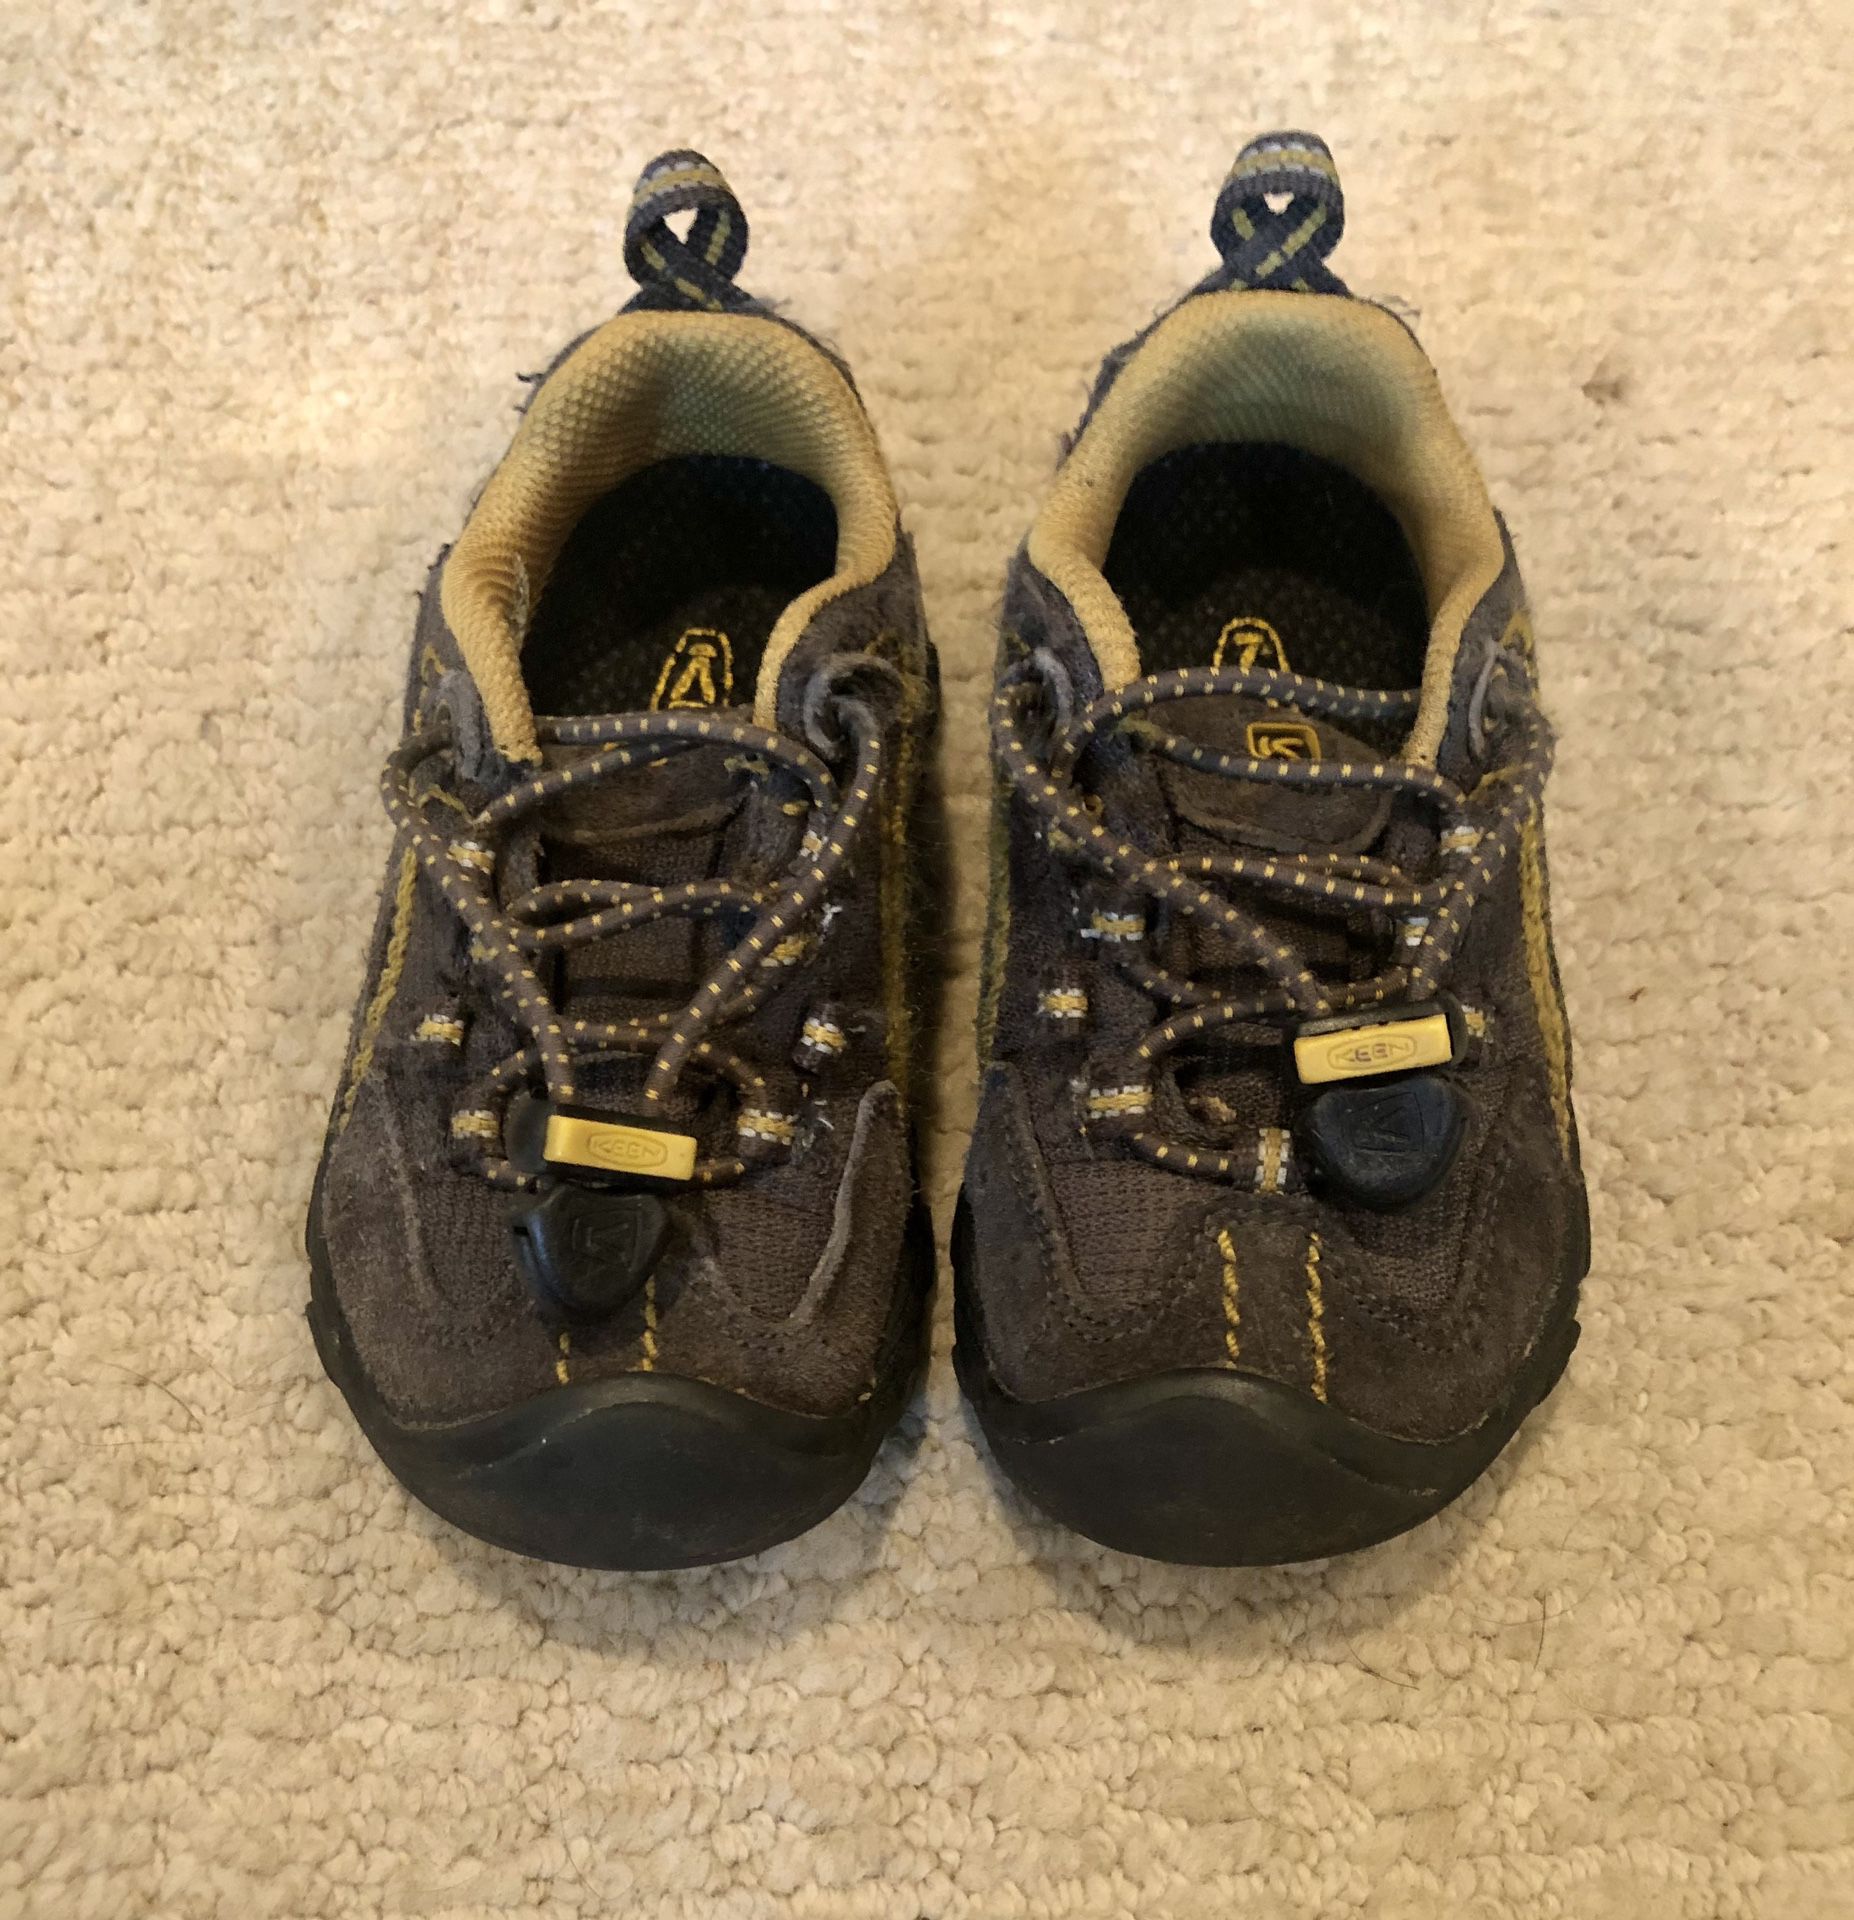 Keen Toddler Shoes, Size US 8